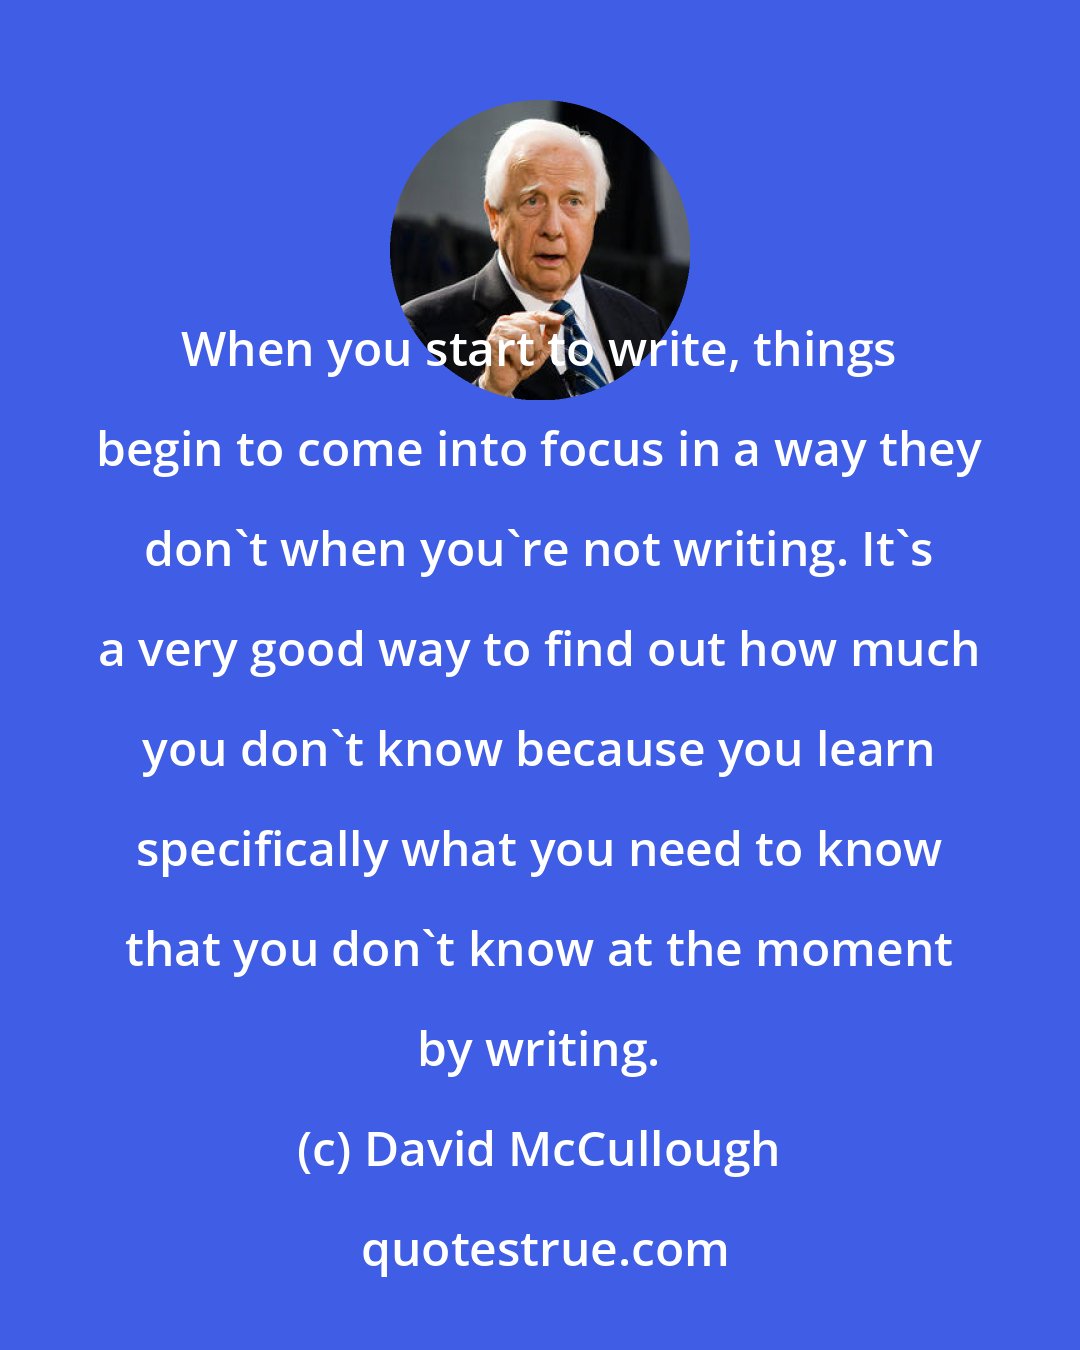 David McCullough: When you start to write, things begin to come into focus in a way they don't when you're not writing. It's a very good way to find out how much you don't know because you learn specifically what you need to know that you don't know at the moment by writing.